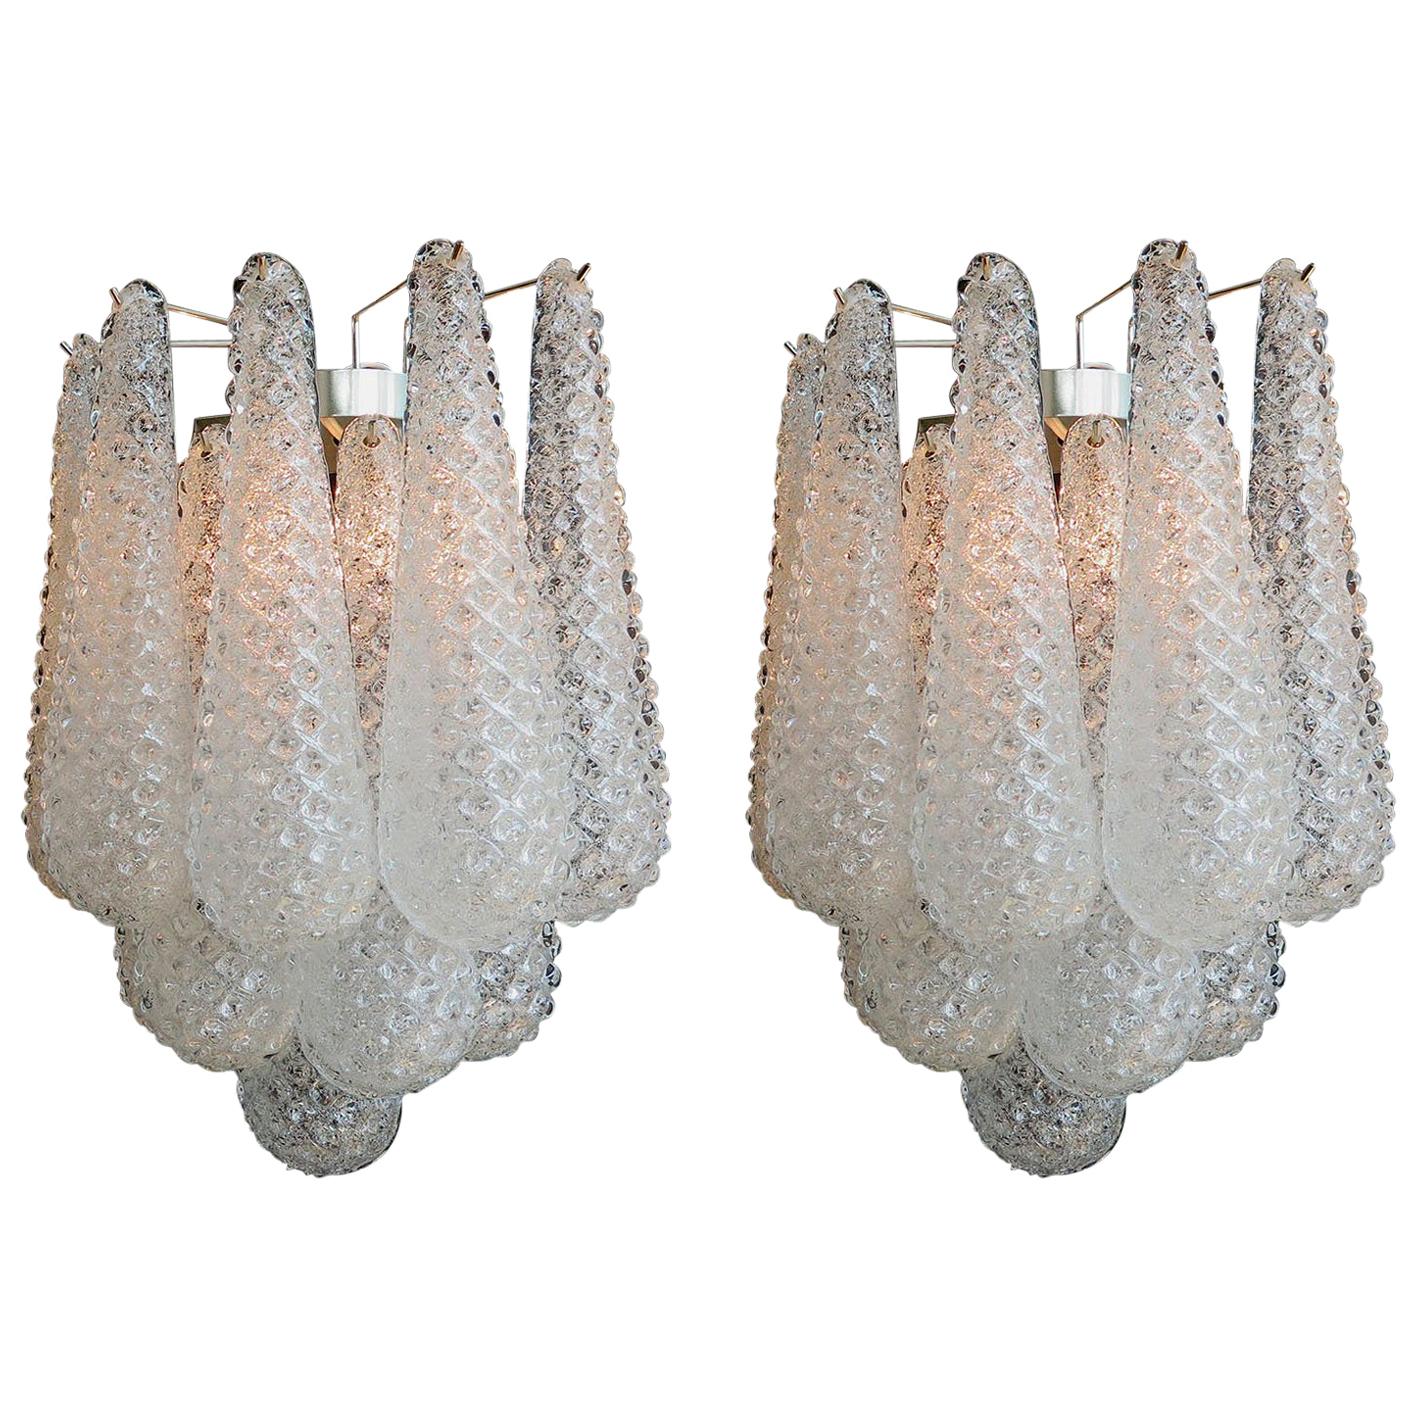 Pair of Italian Wall Sconces, Murano, 1970s For Sale